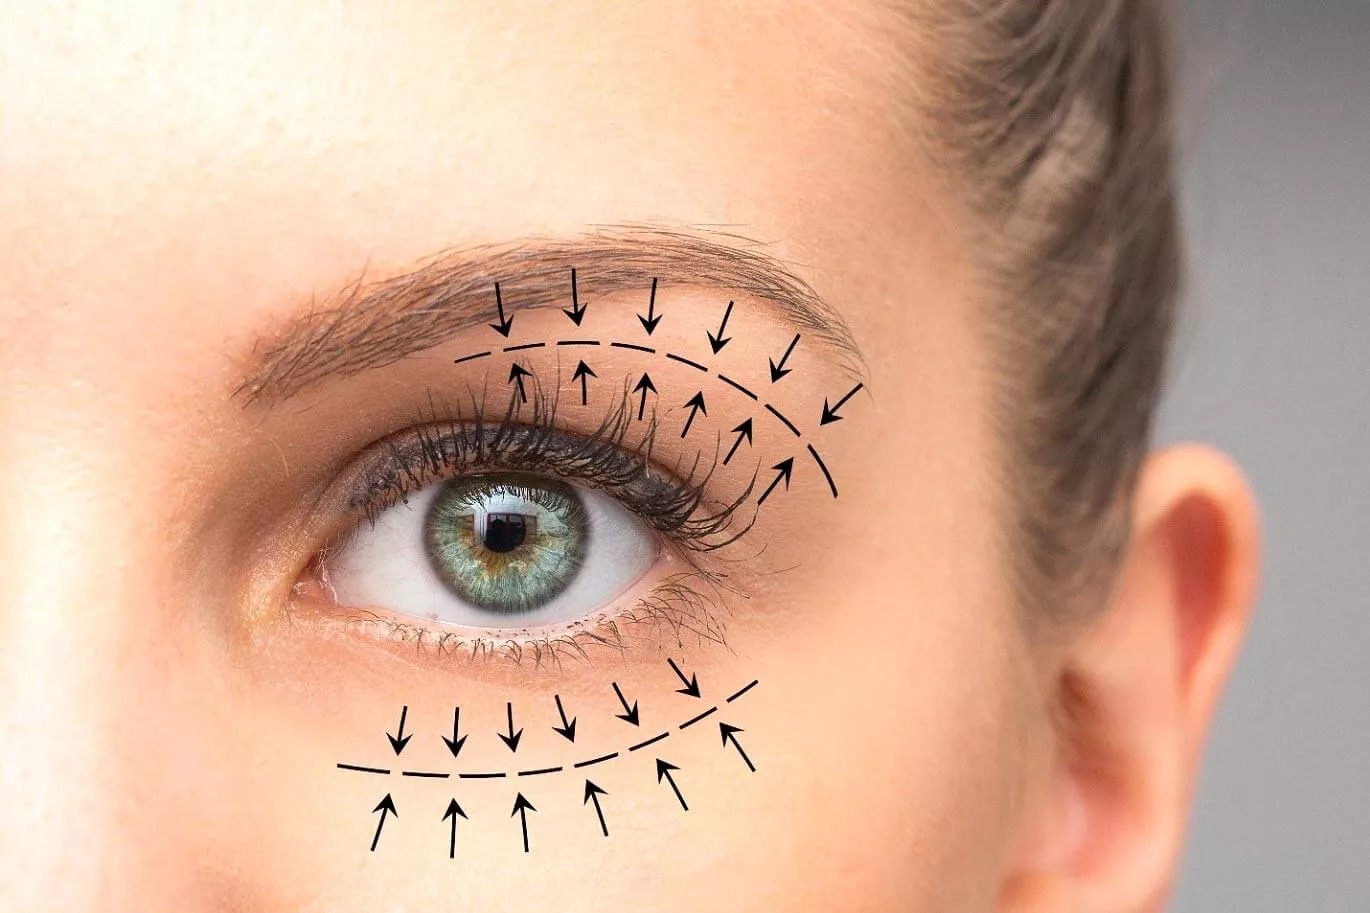 Blepharoplasty - A Complete Overview Of The Procedure